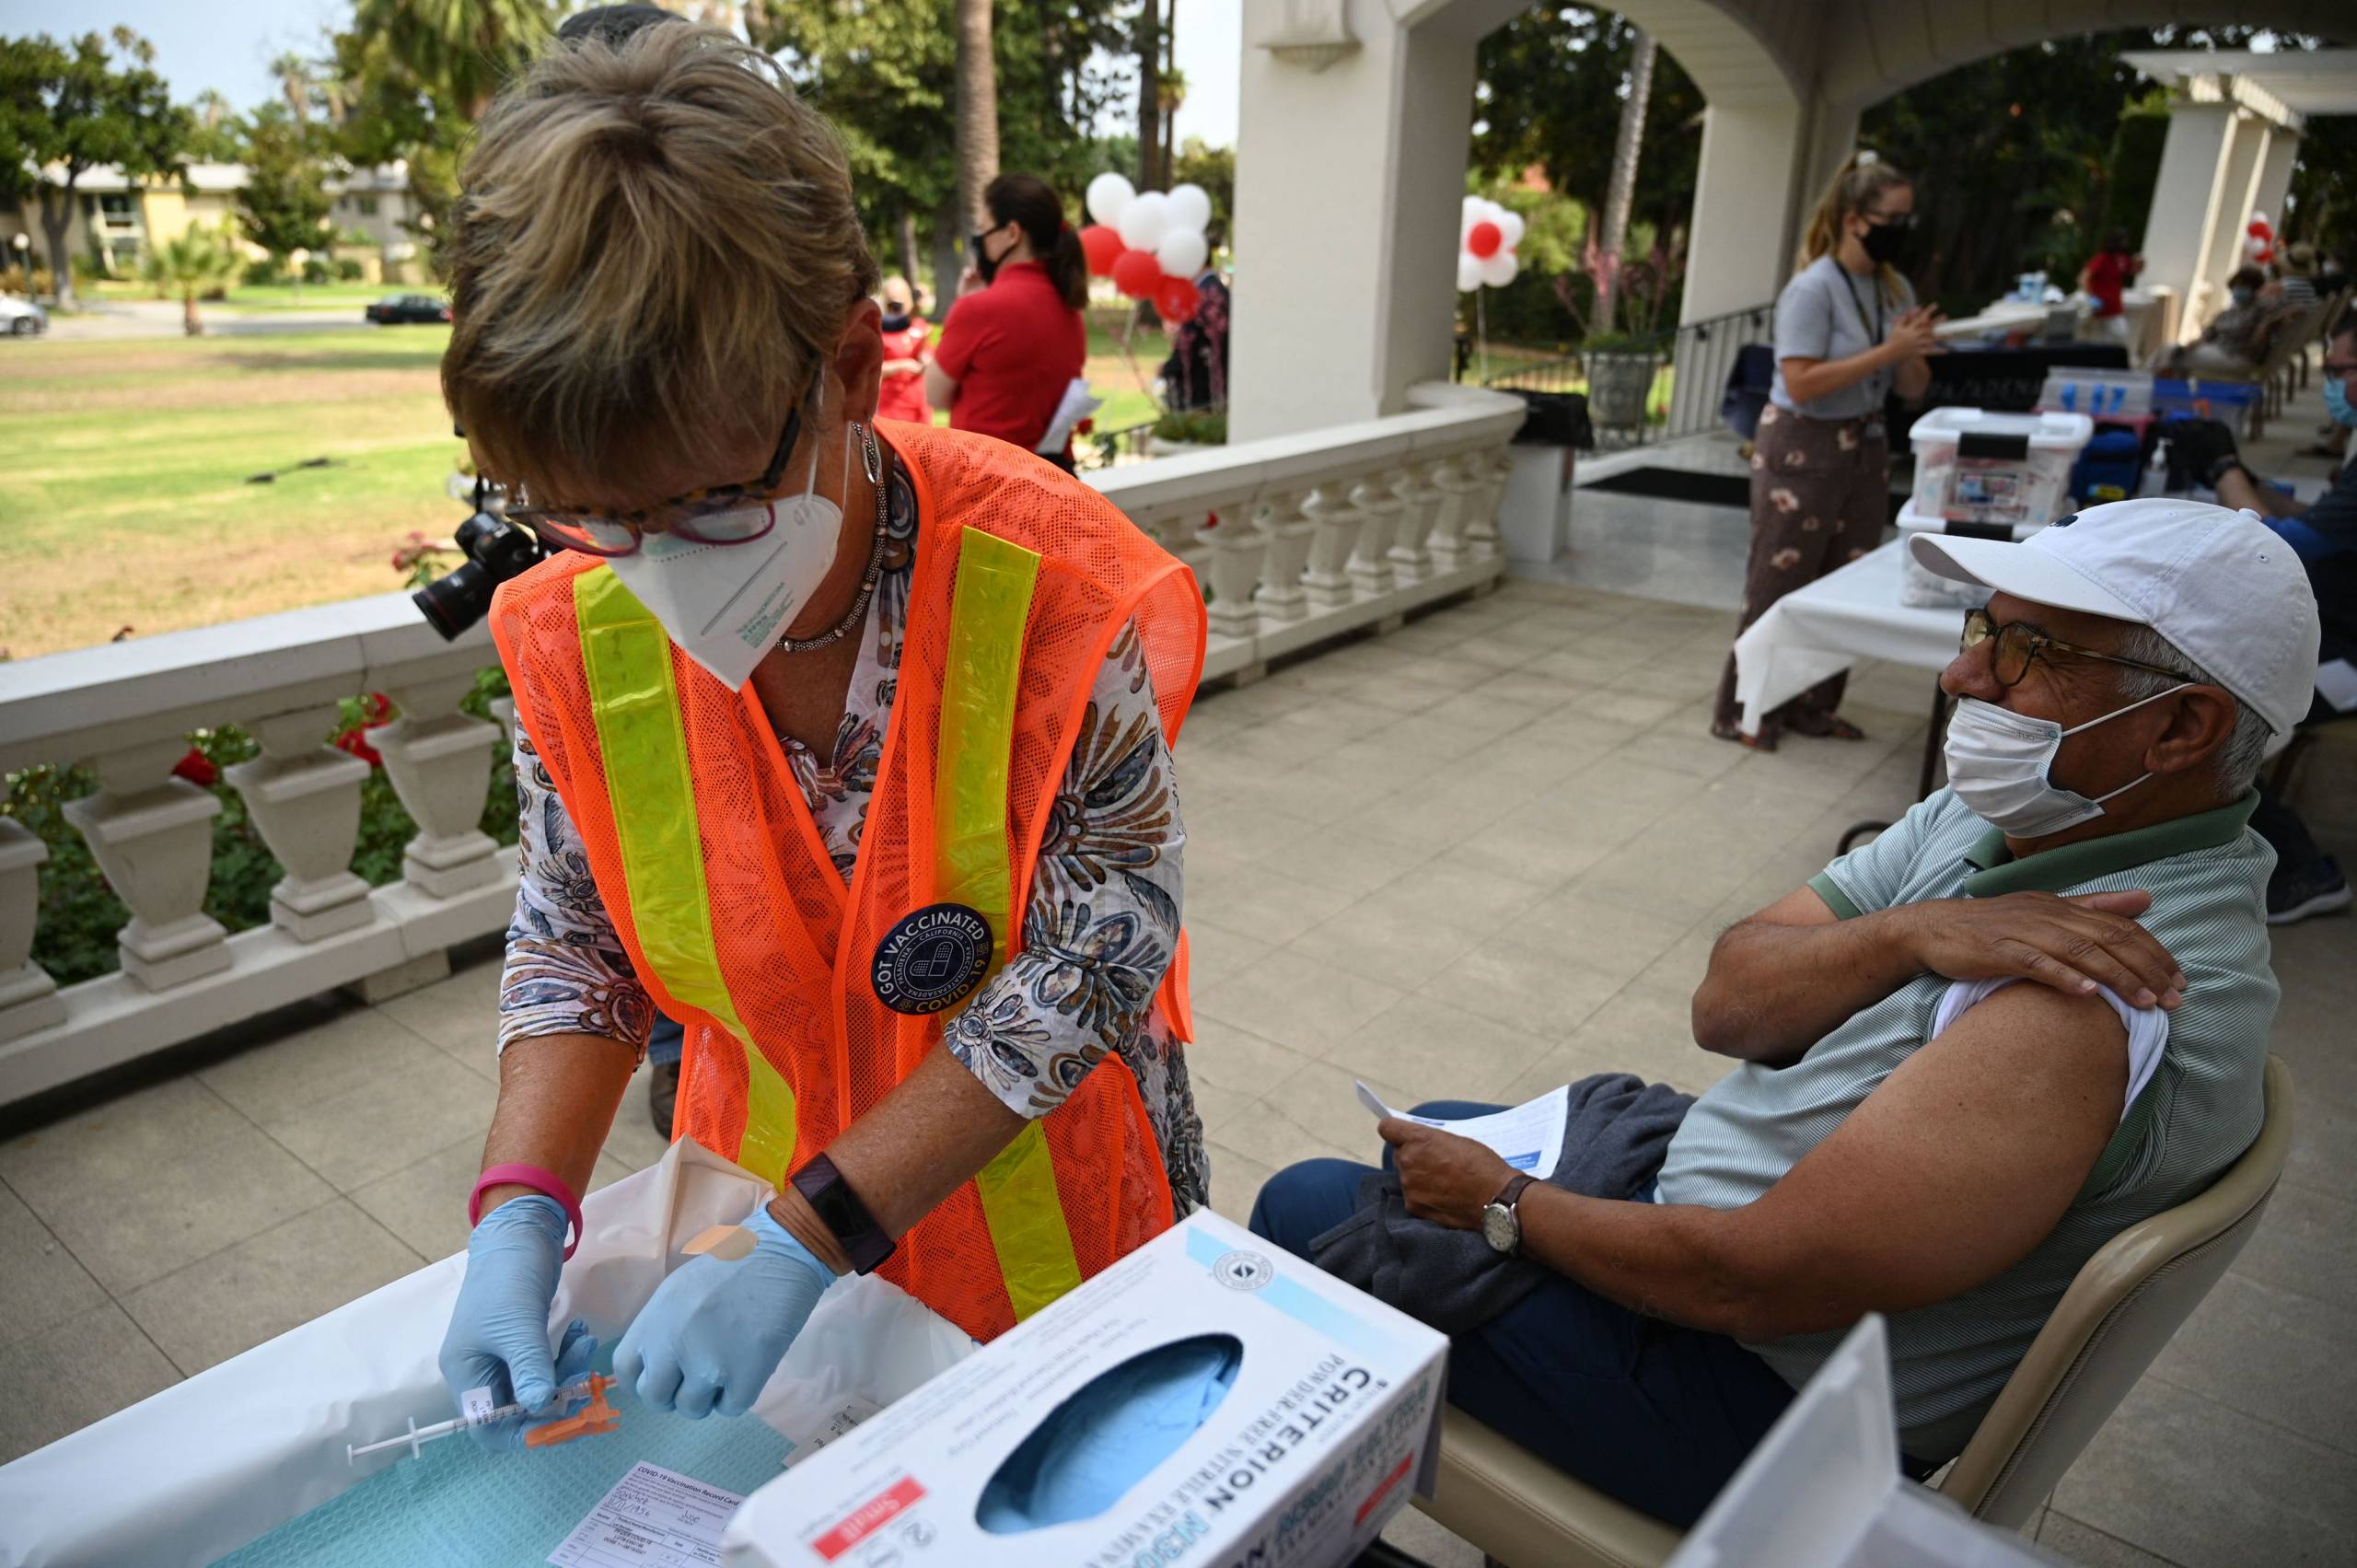 A man sitting on a large porch lifts up his sleeve as he awaits his vaccine, beside a woman in an orange safety vest preparing the vaccine.